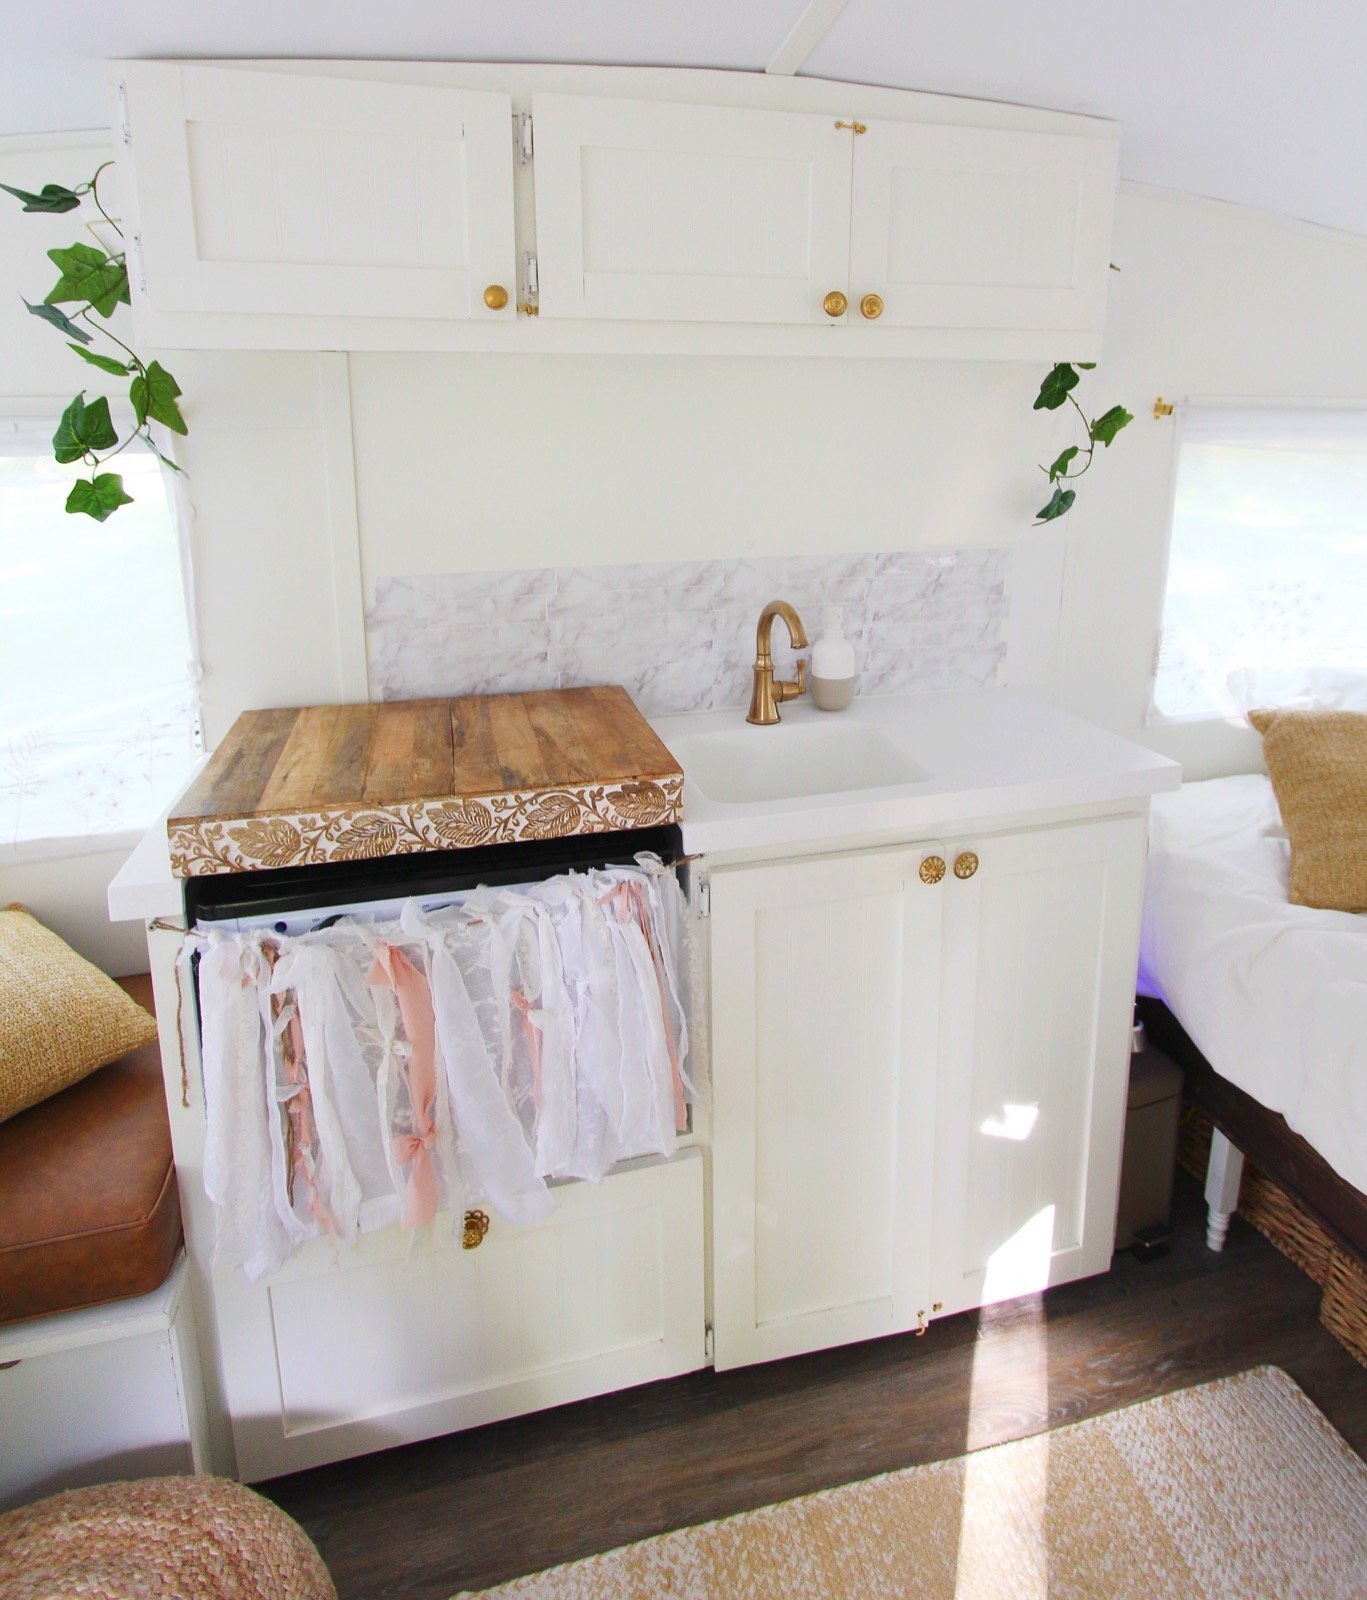 vintage-camper-classic-white-gold-reno-inspirations-ideas-boho-gypsy-hippy-pearl-musician-singer-songwriter-interior20